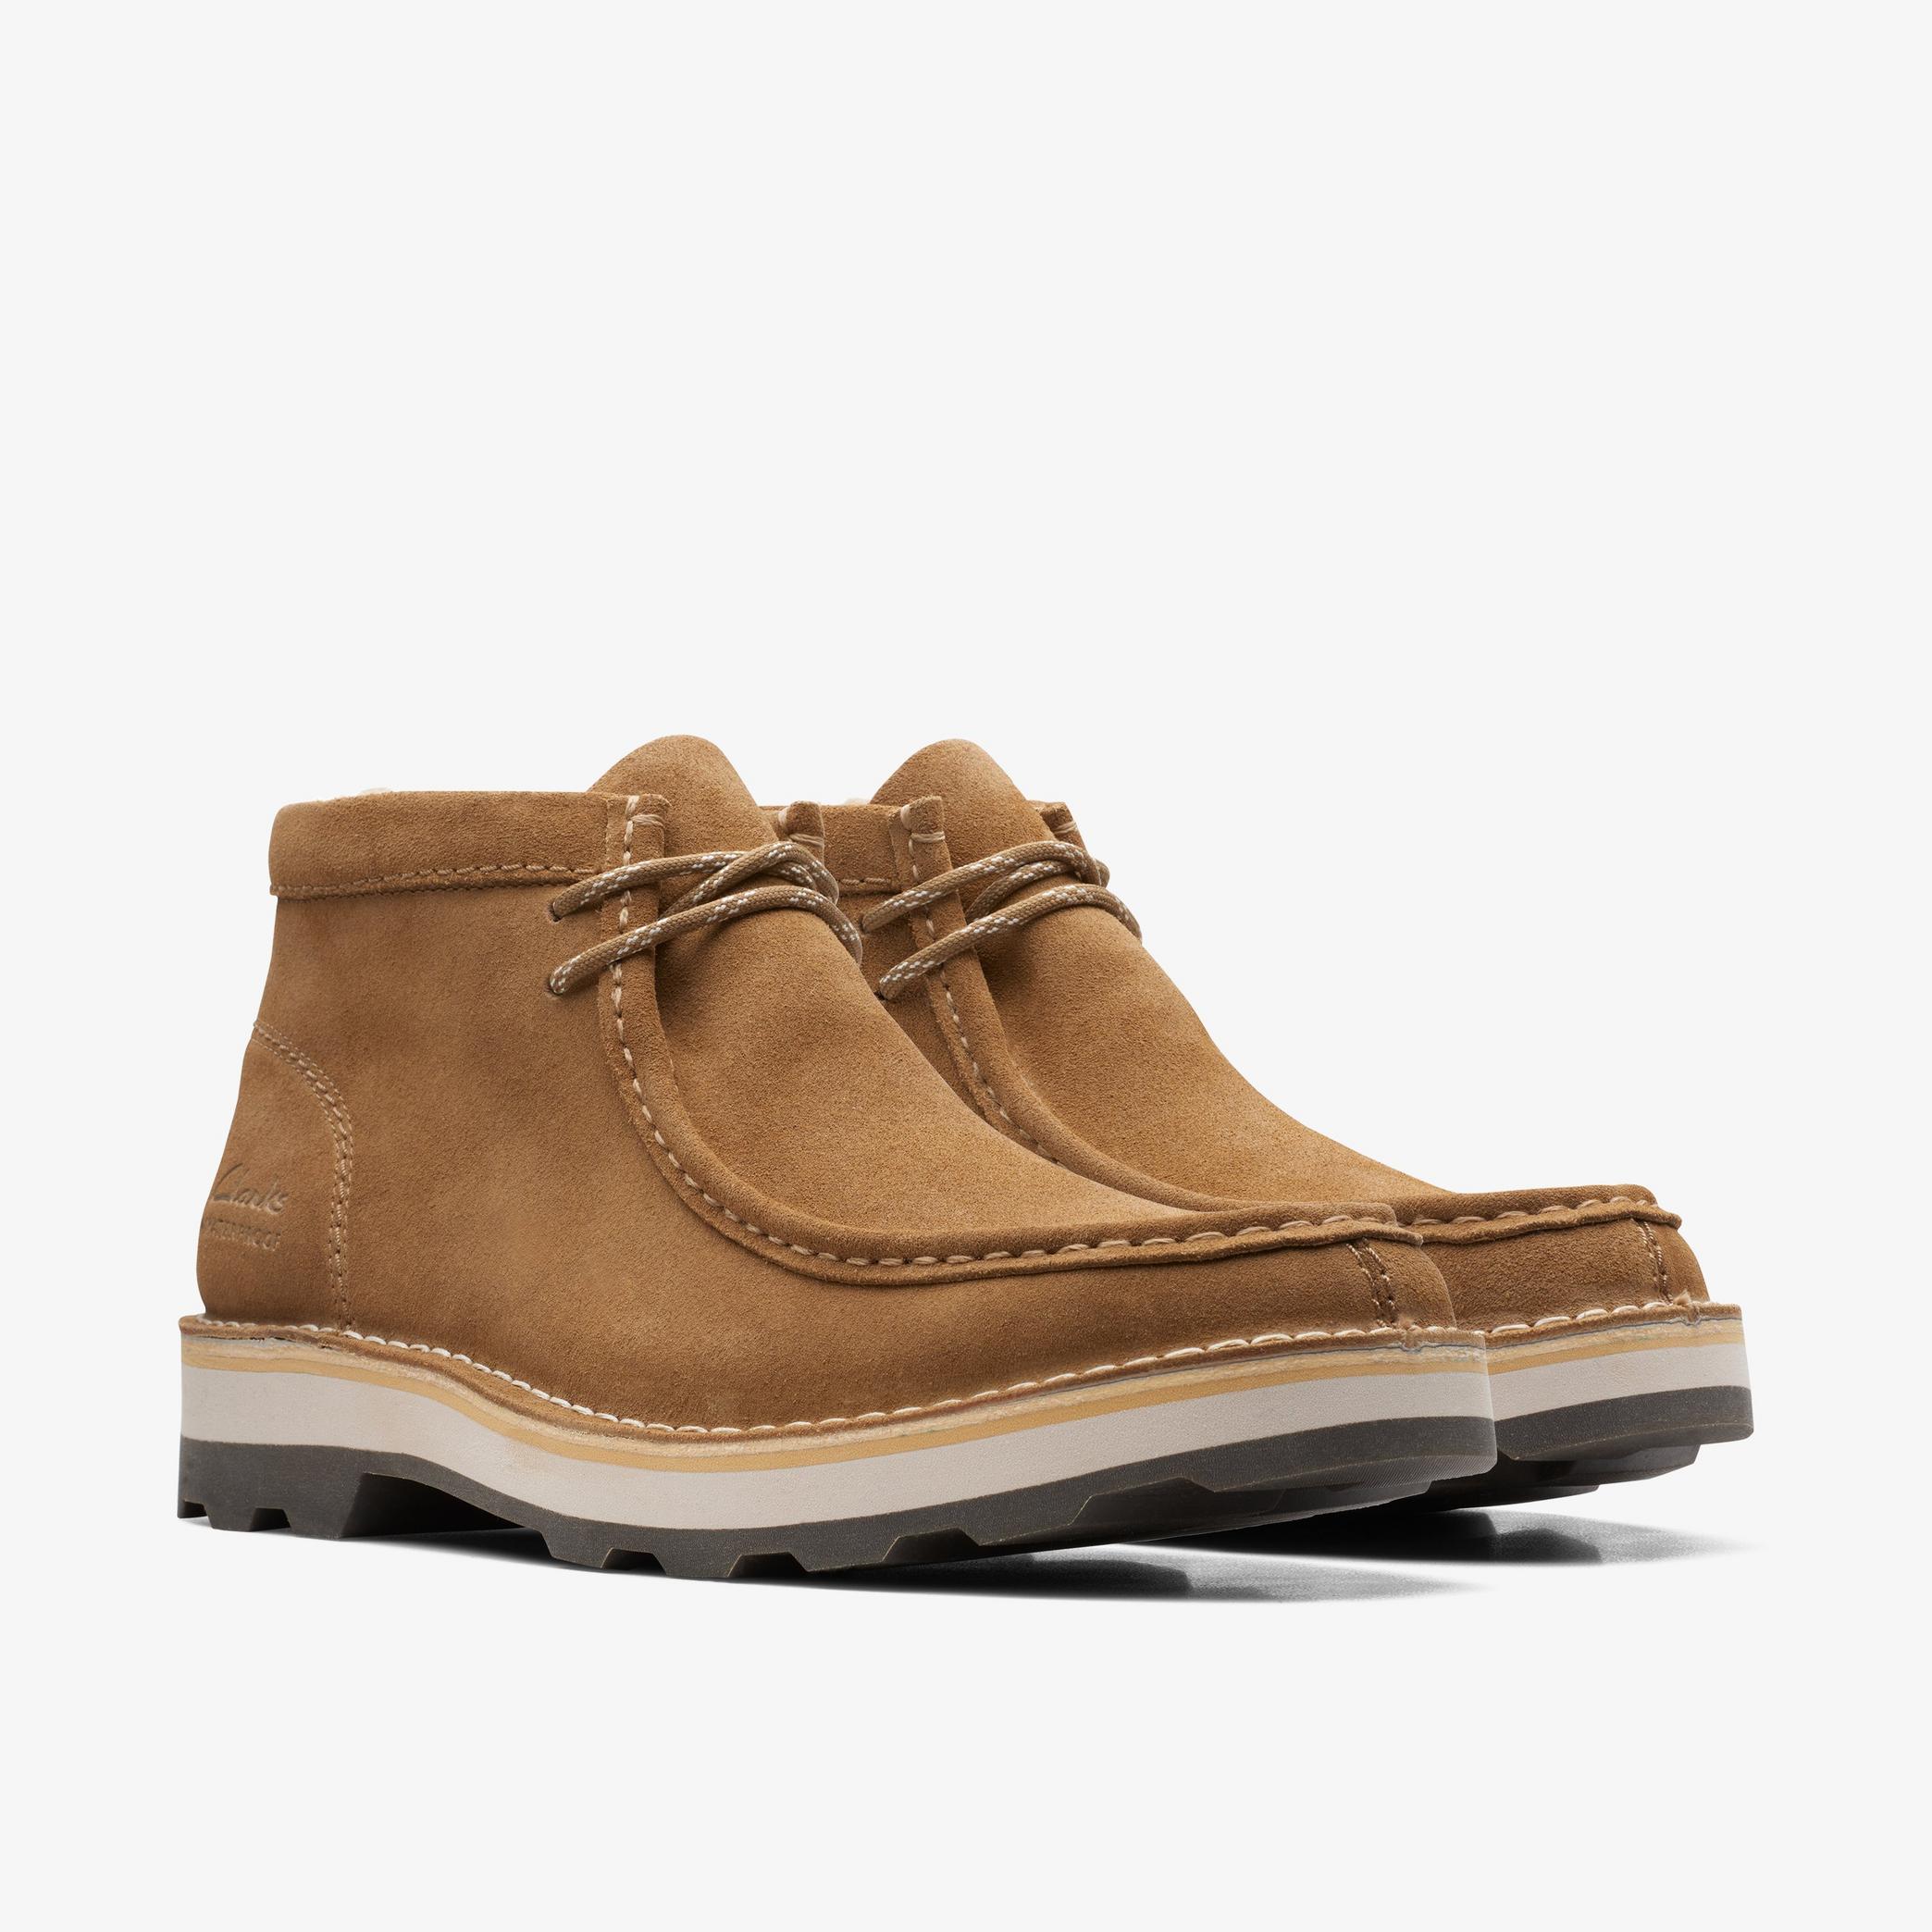 Corston Wally Waterproof Dark Sand Warmlined Ankle Boots, view 4 of 6